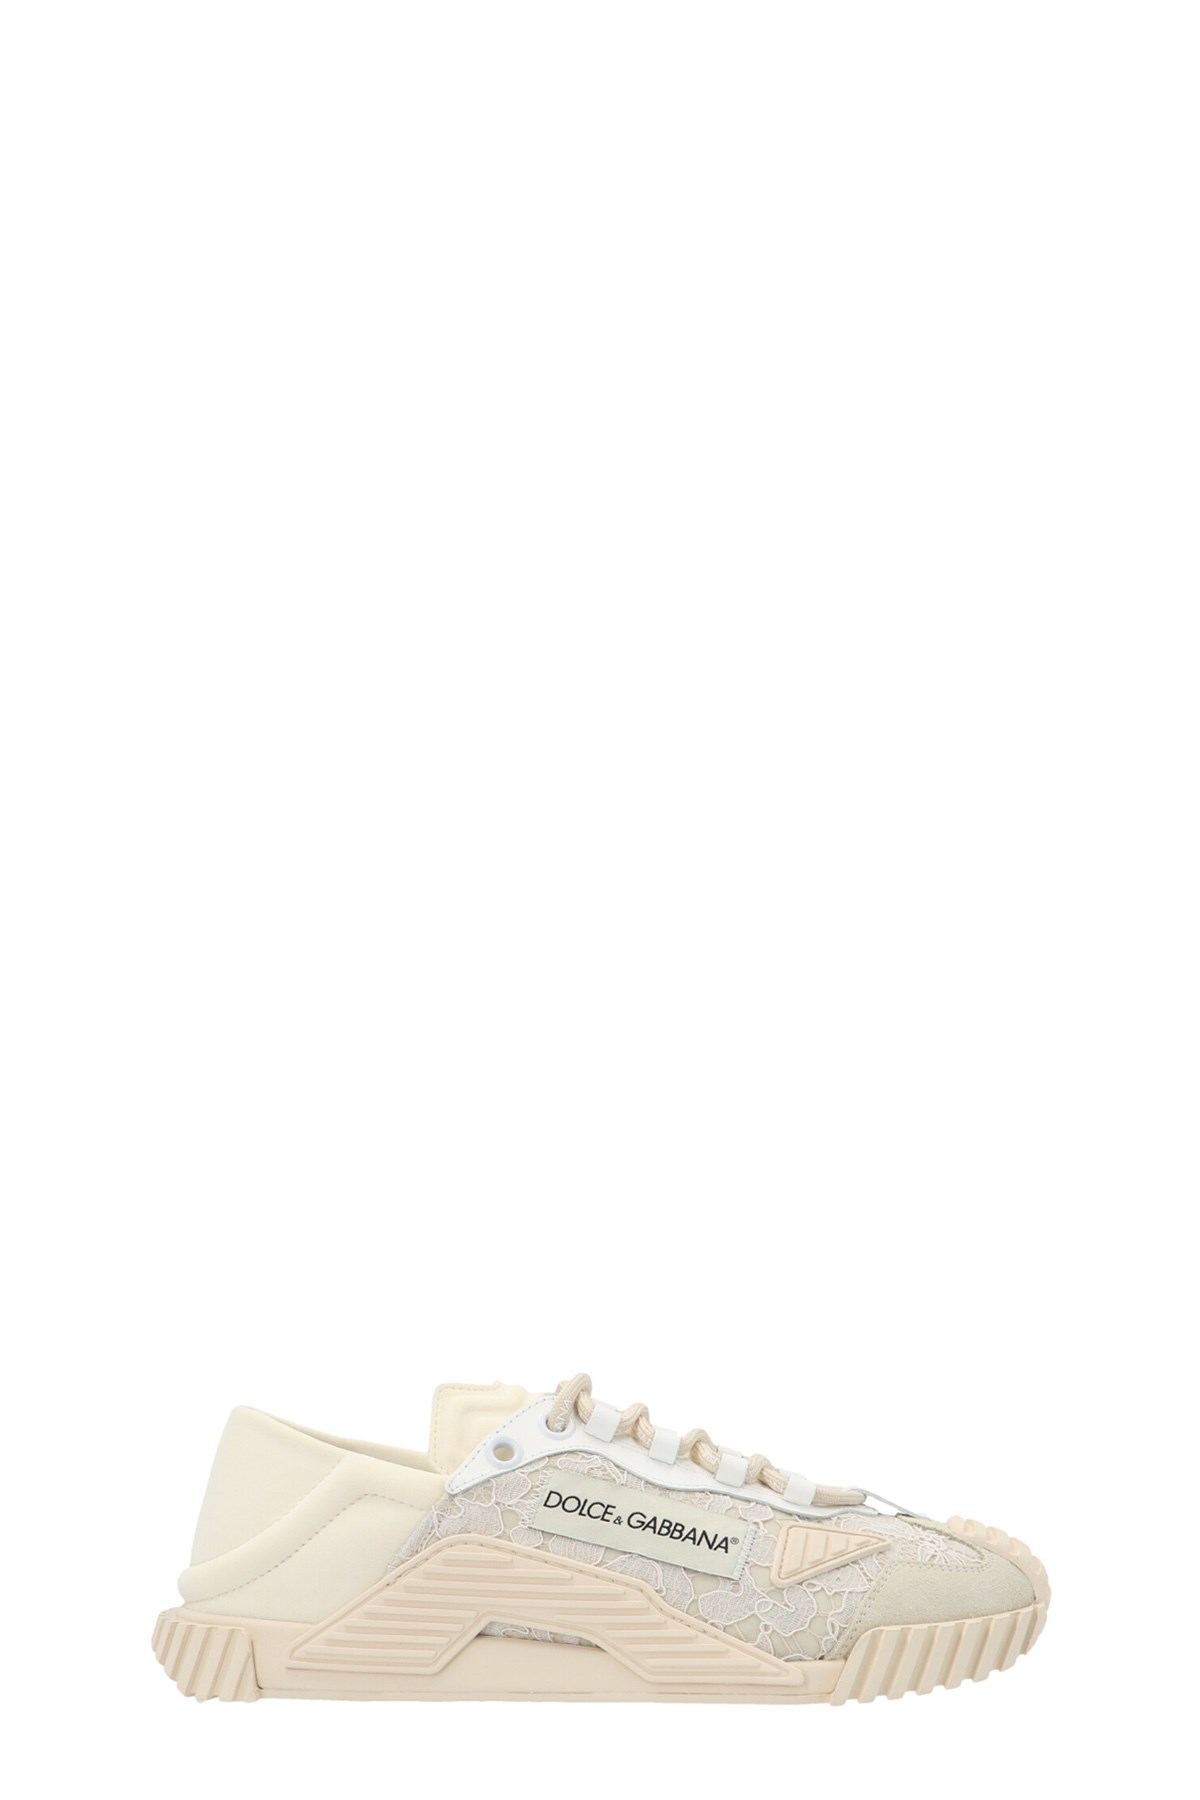 DOLCE & GABBANA Lace Sneakers